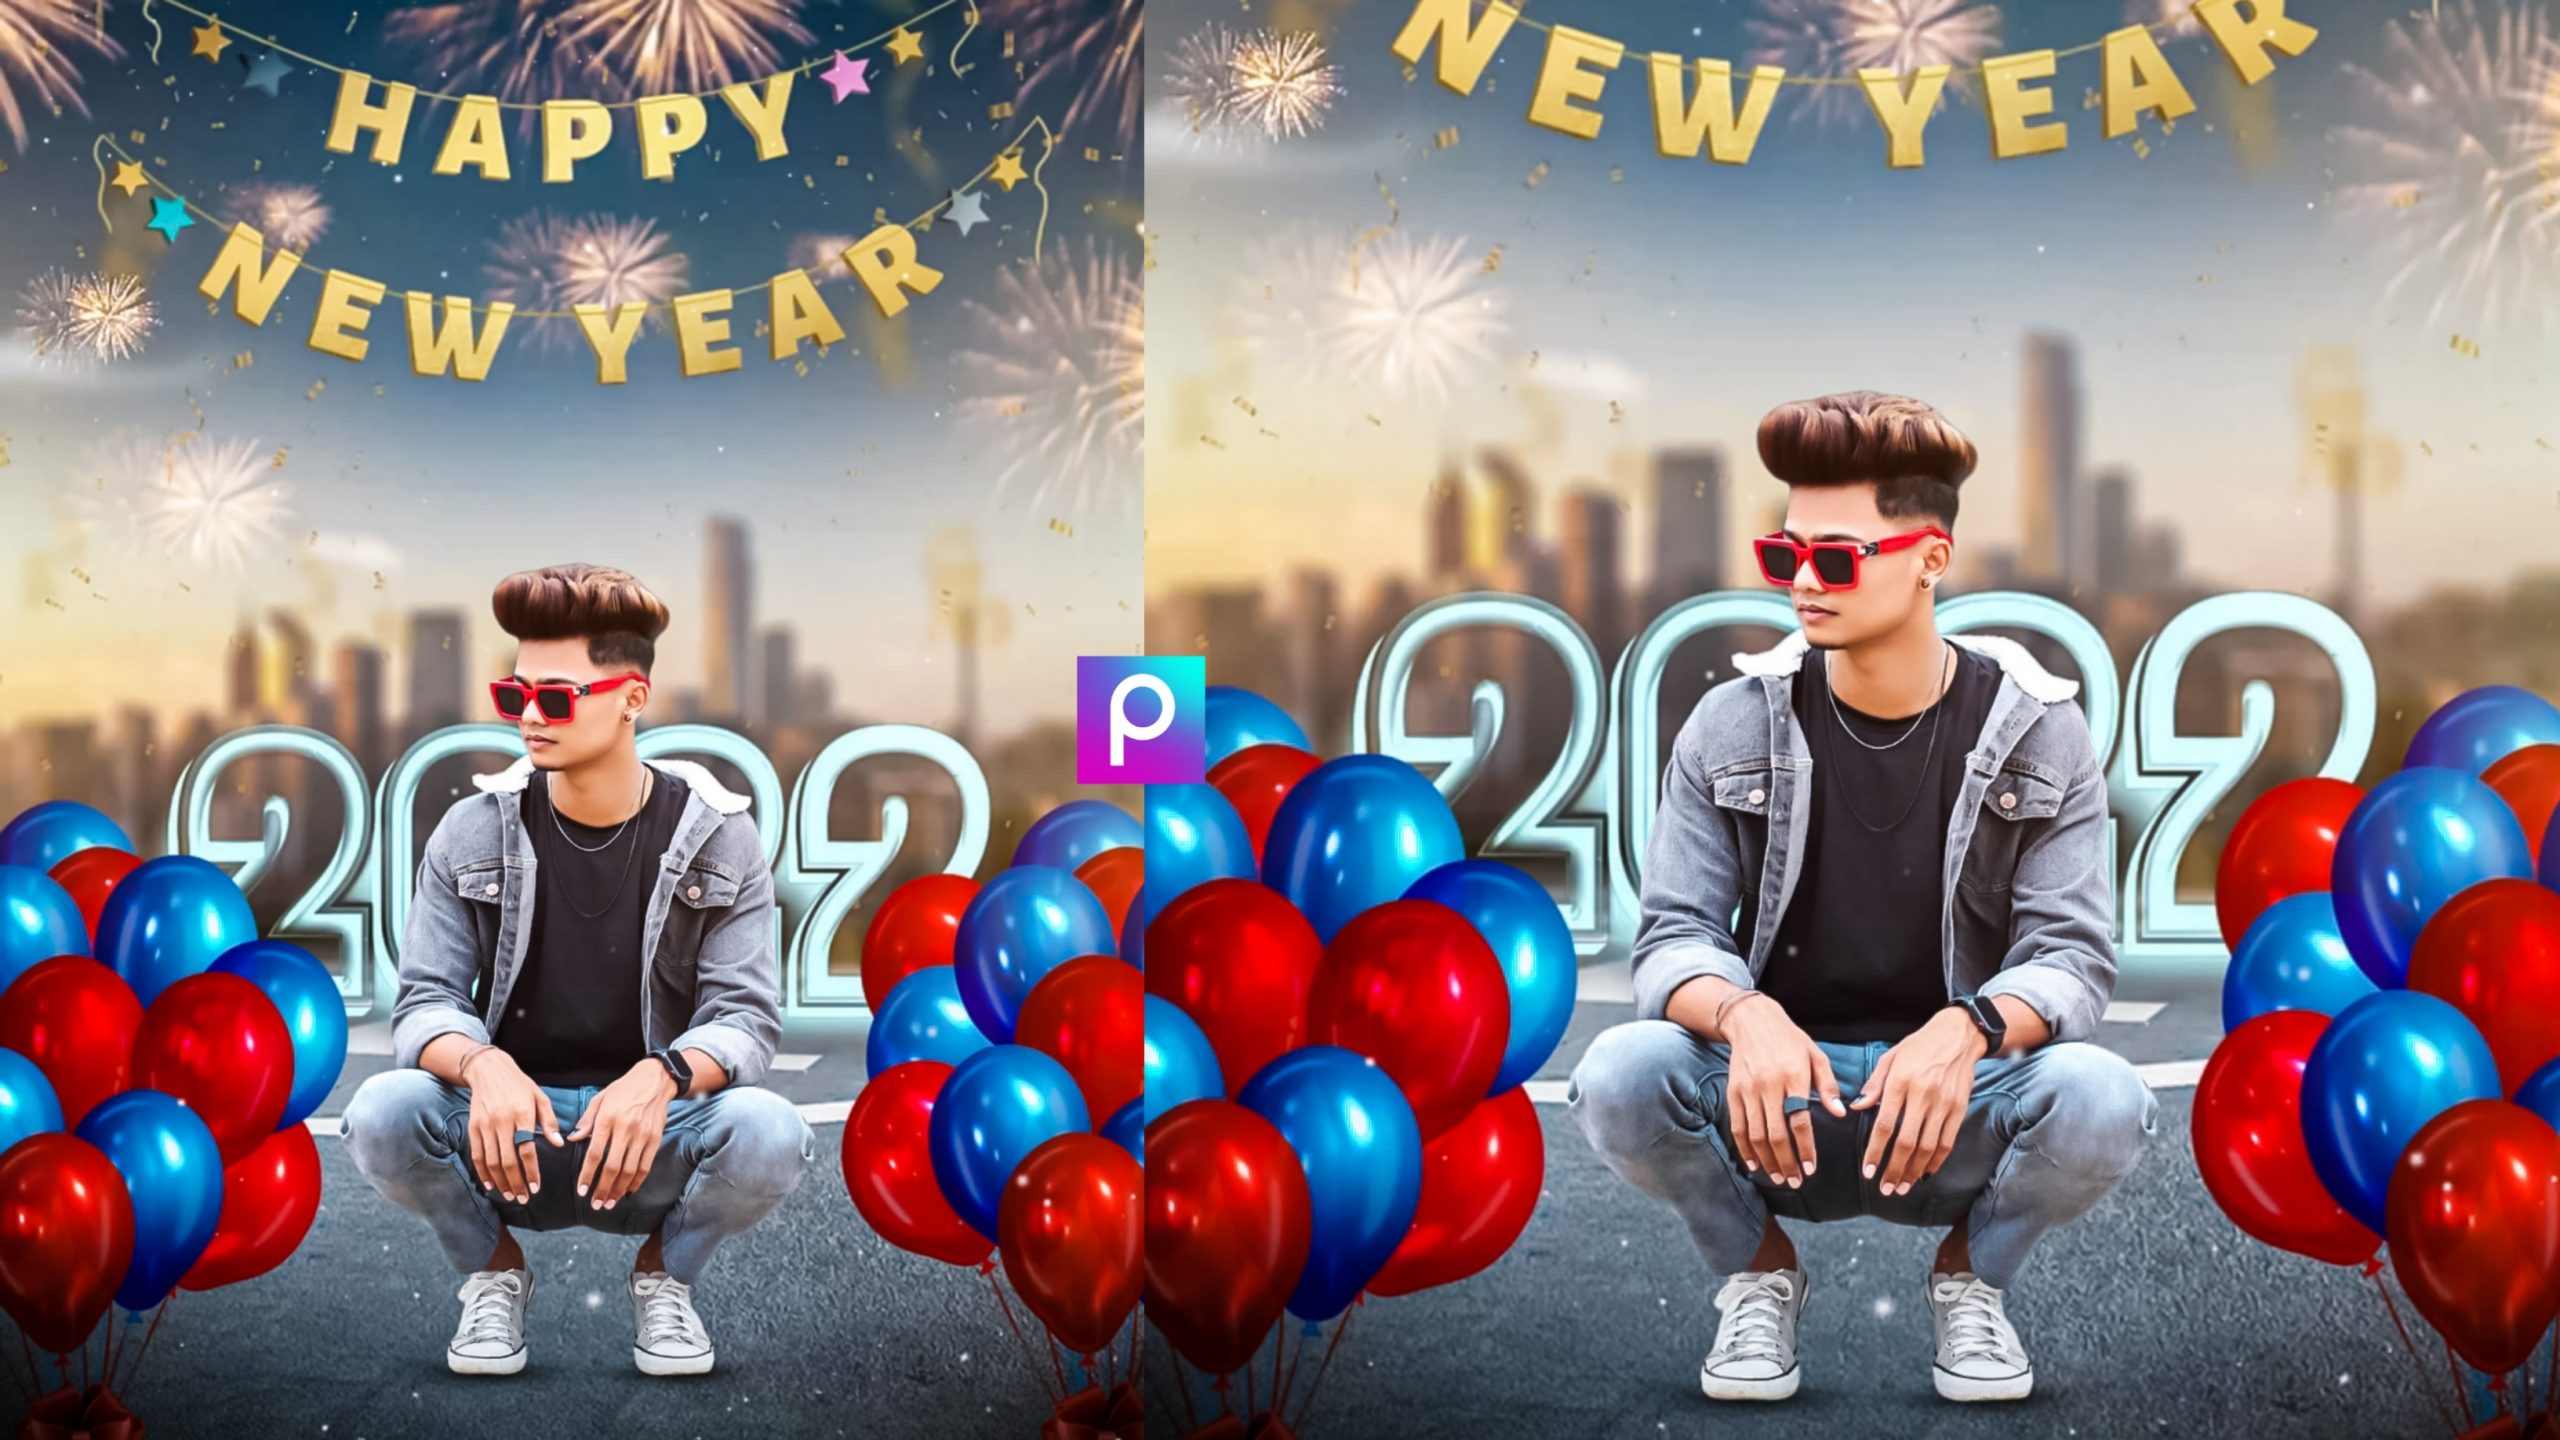 Happy New Year 2022 Special Photo Editing Download Background And PNG -  Tahir Editz